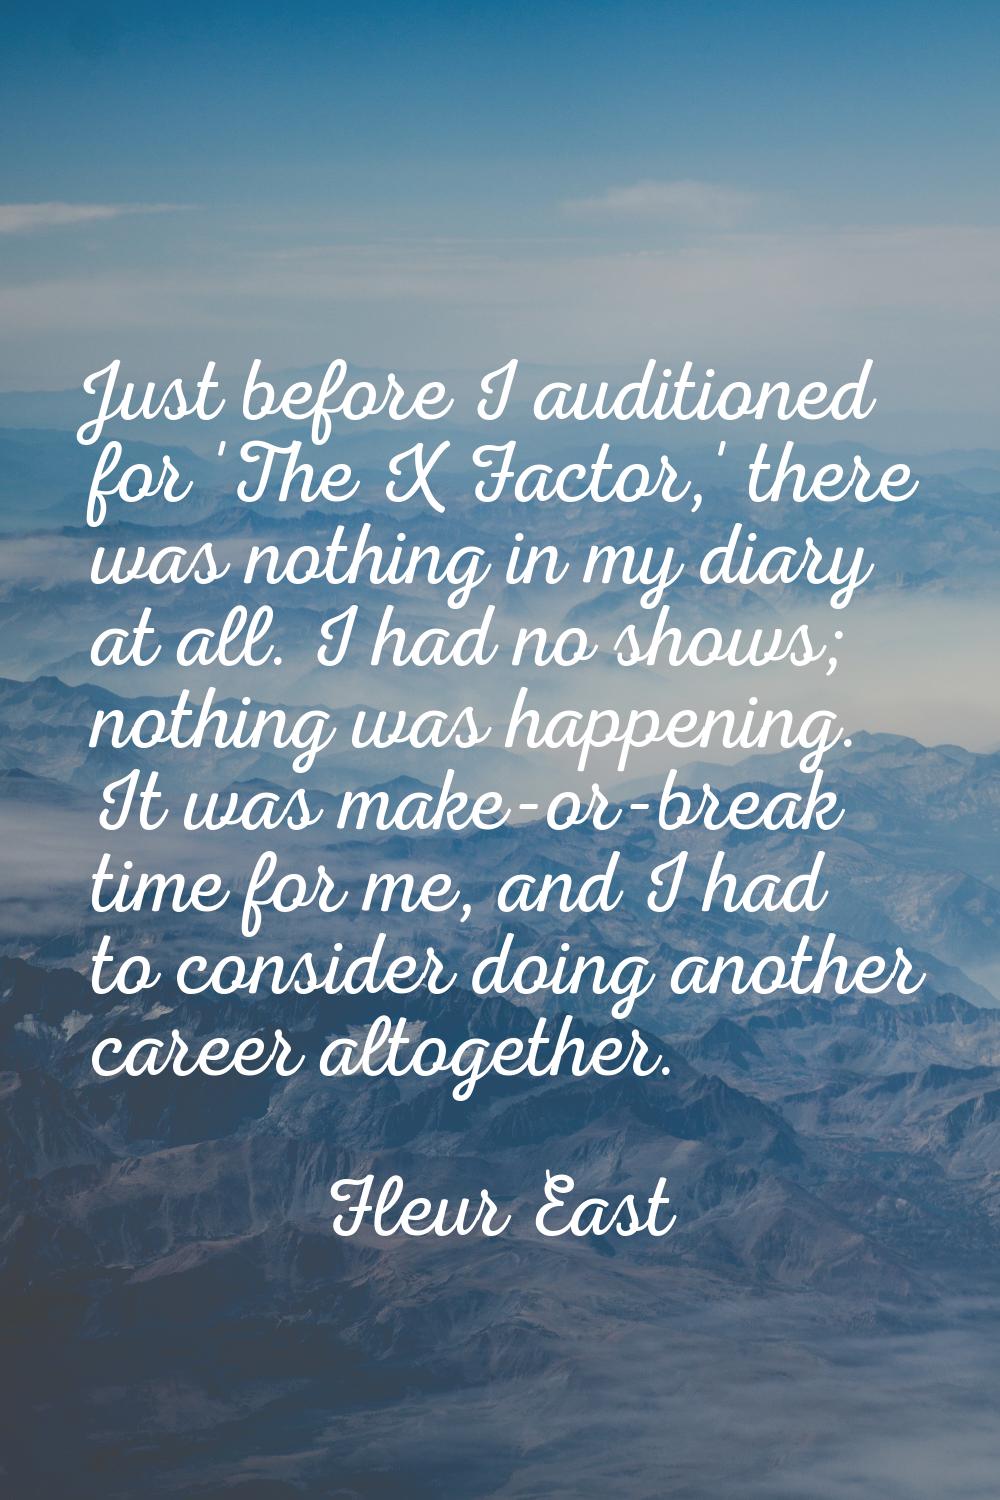 Just before I auditioned for 'The X Factor,' there was nothing in my diary at all. I had no shows; 